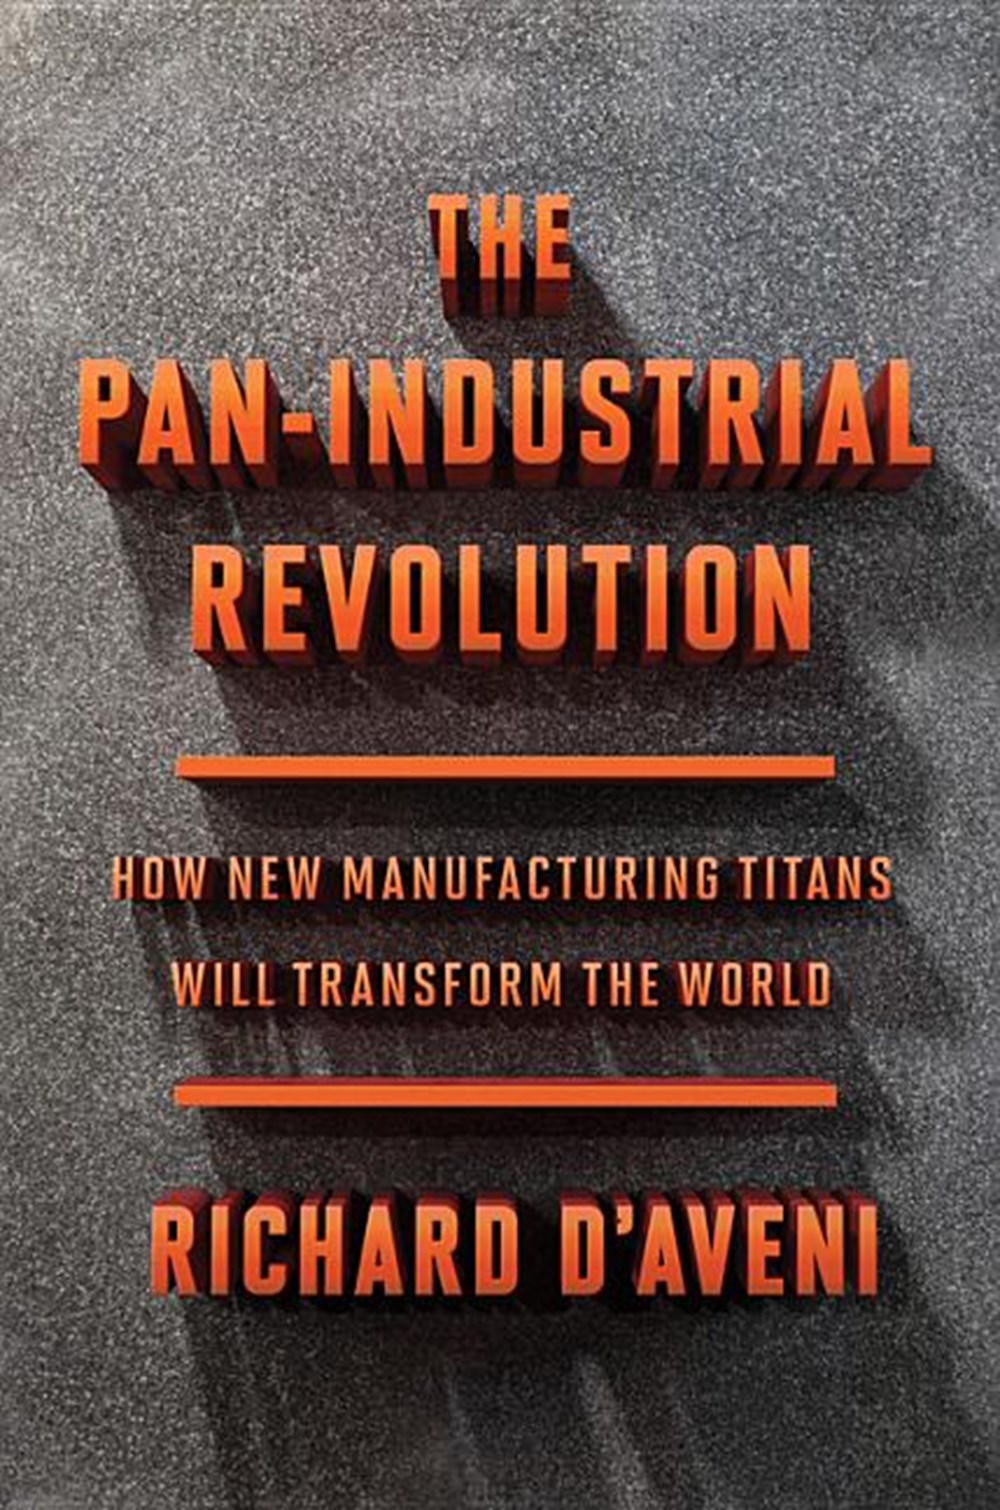 Pan-Industrial Revolution How New Manufacturing Titans Will Transform the World